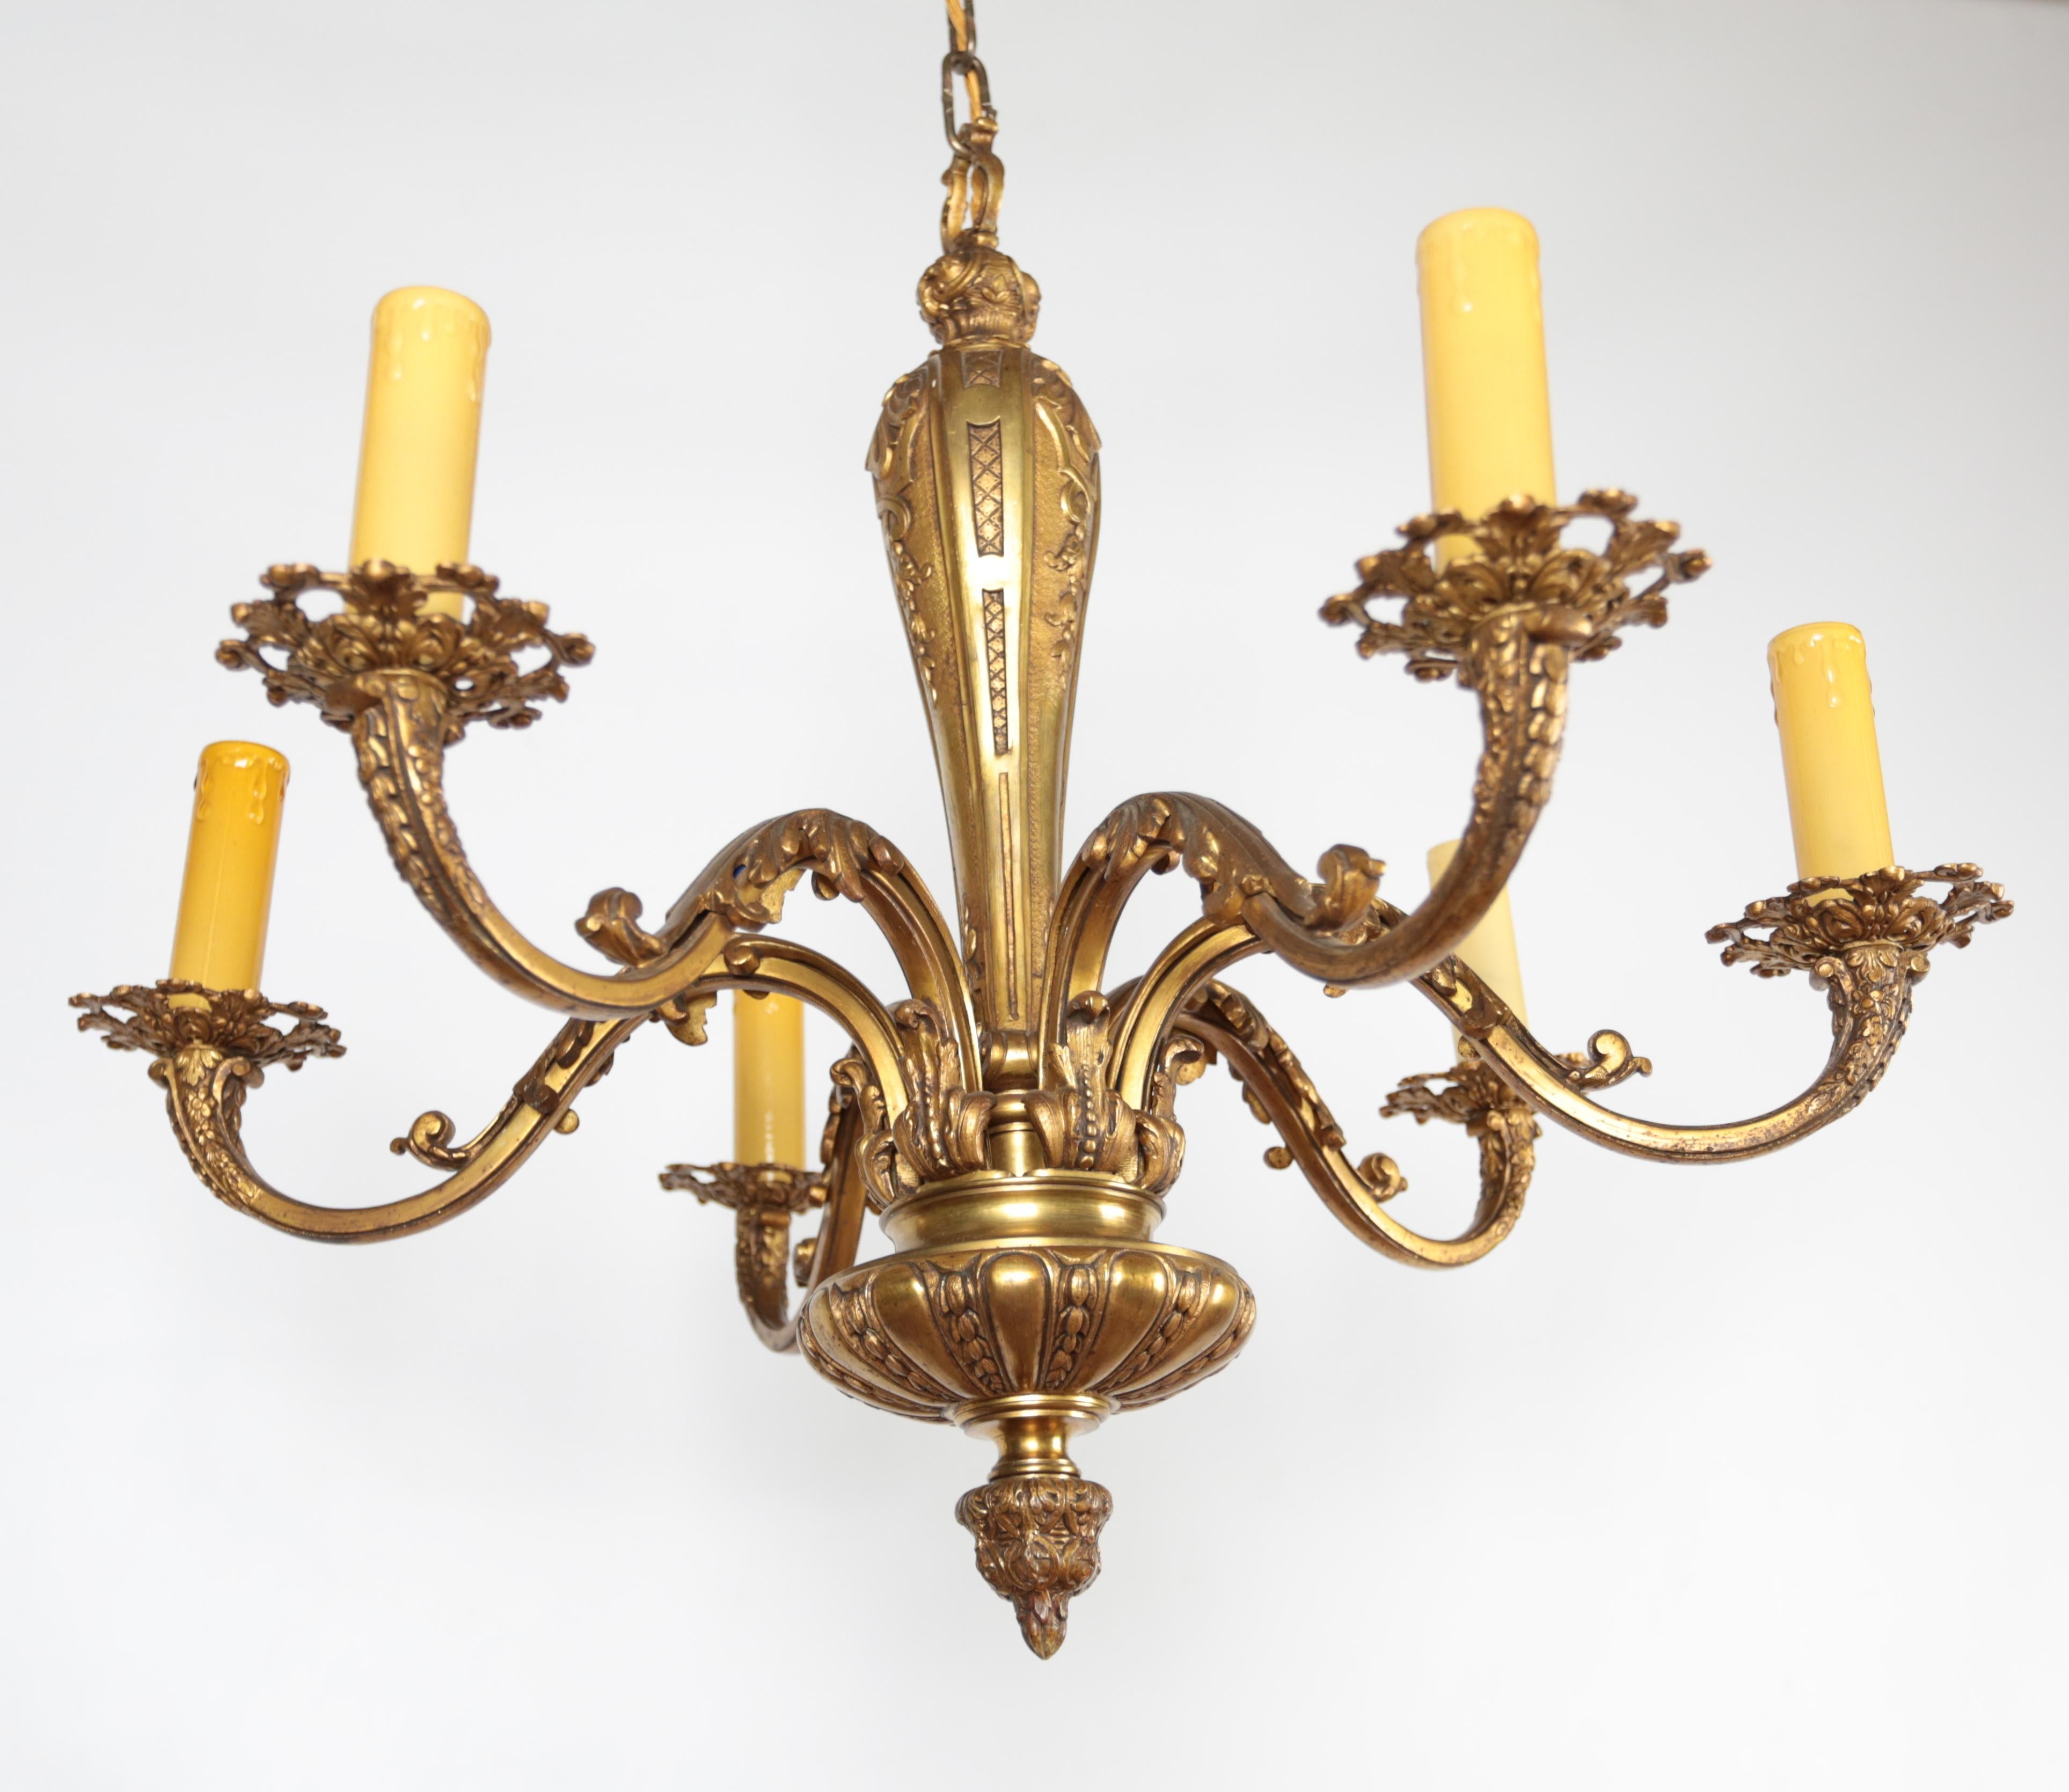 Antique Louis XIV Baroque style chandeliers made of solid cast bronze represent a majestic elegance that elevates the interior. The chandeliers are polished to a high golden shine. First-class quality of material and craftsmanship. The chandeliers